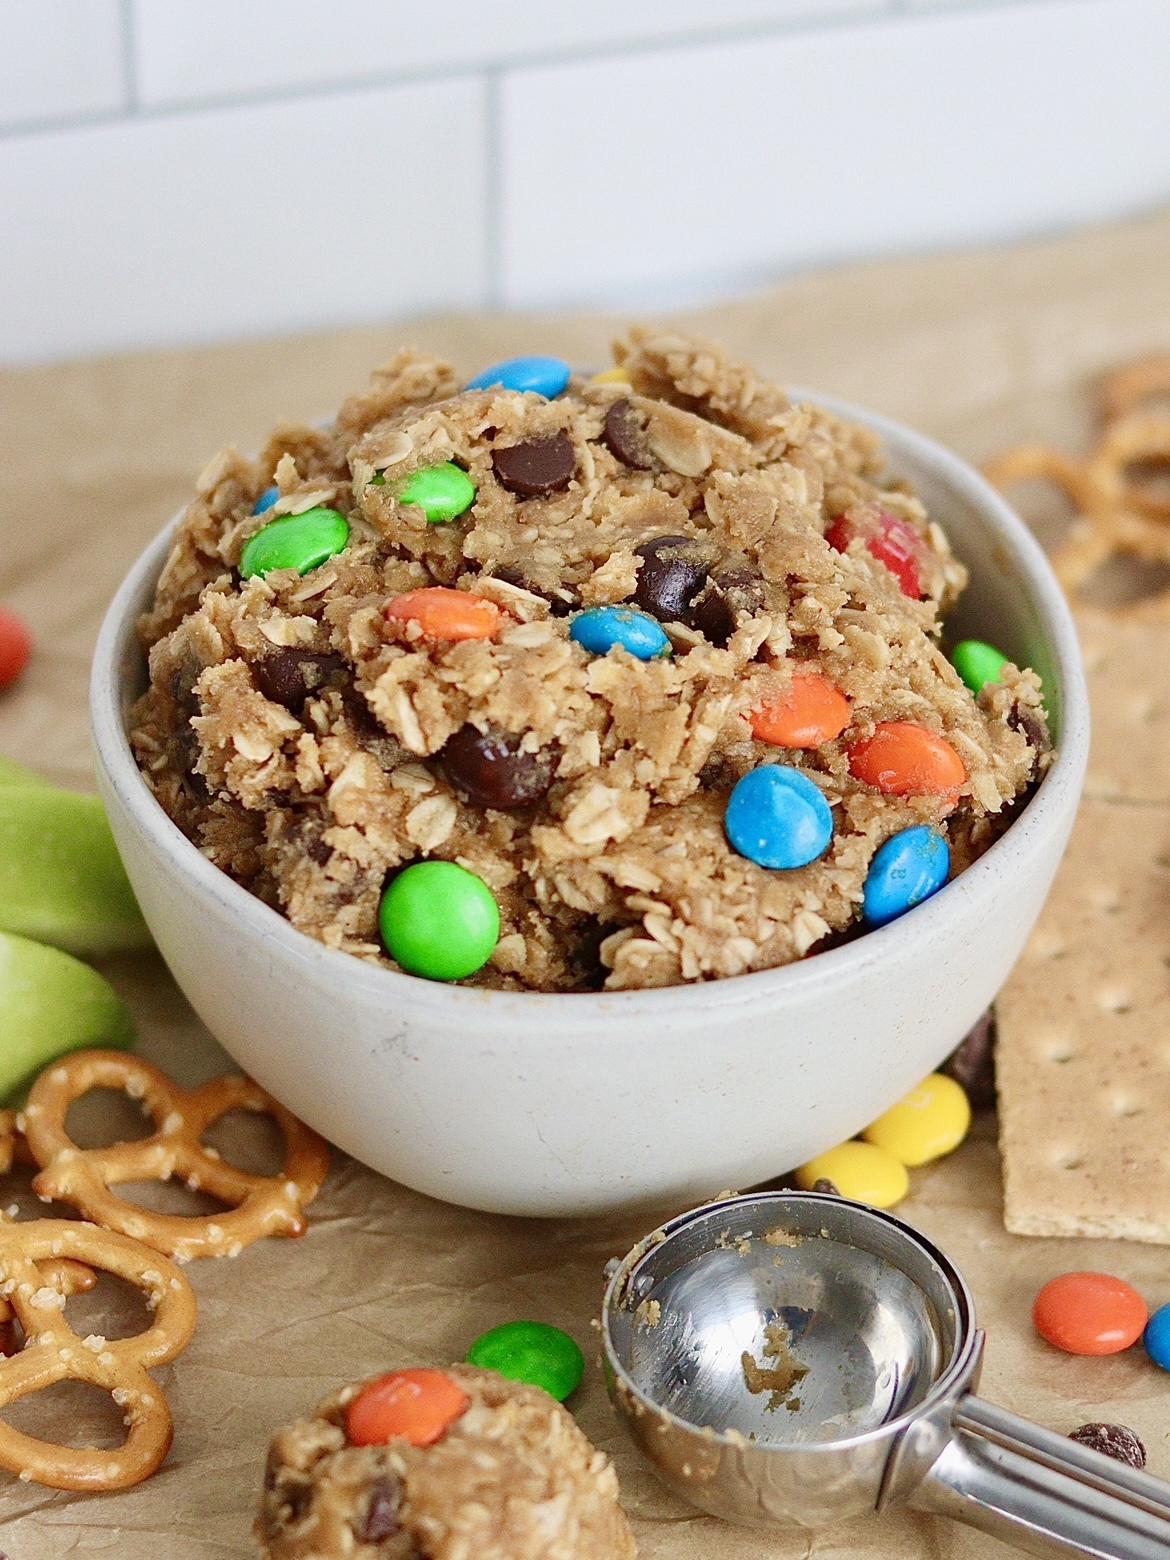 edible monster cookie dough in a bowl surrounded by apples, pretzels and graham crackers. A scoop of monster cookie dough is next to the bowl, with an empty cookie dough scoop